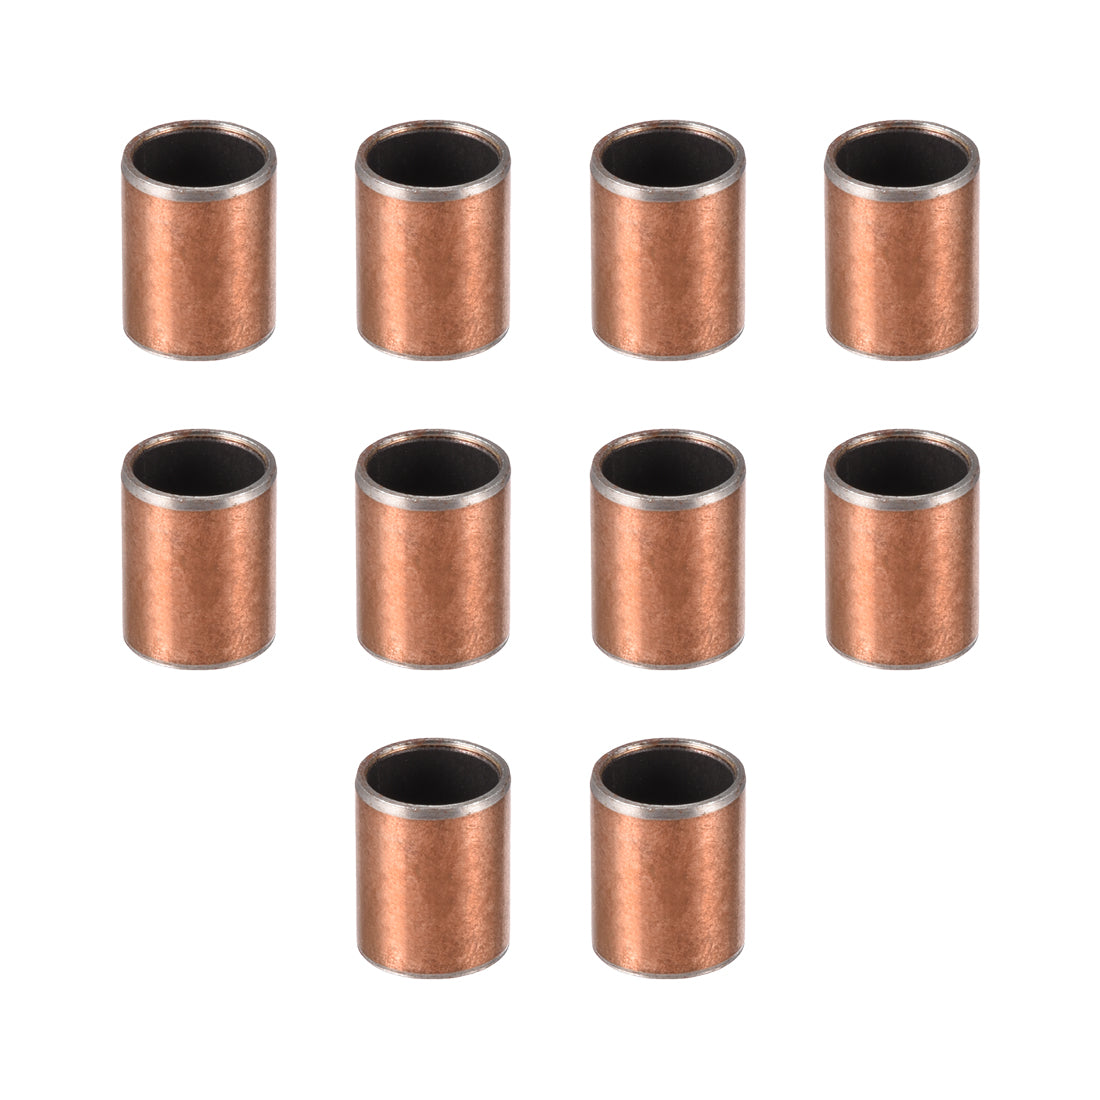 uxcell Uxcell Sleeve (Plain) Bearings 10mm x 12mm x 15mm Wrapped Oilless Bushings 10Pcs